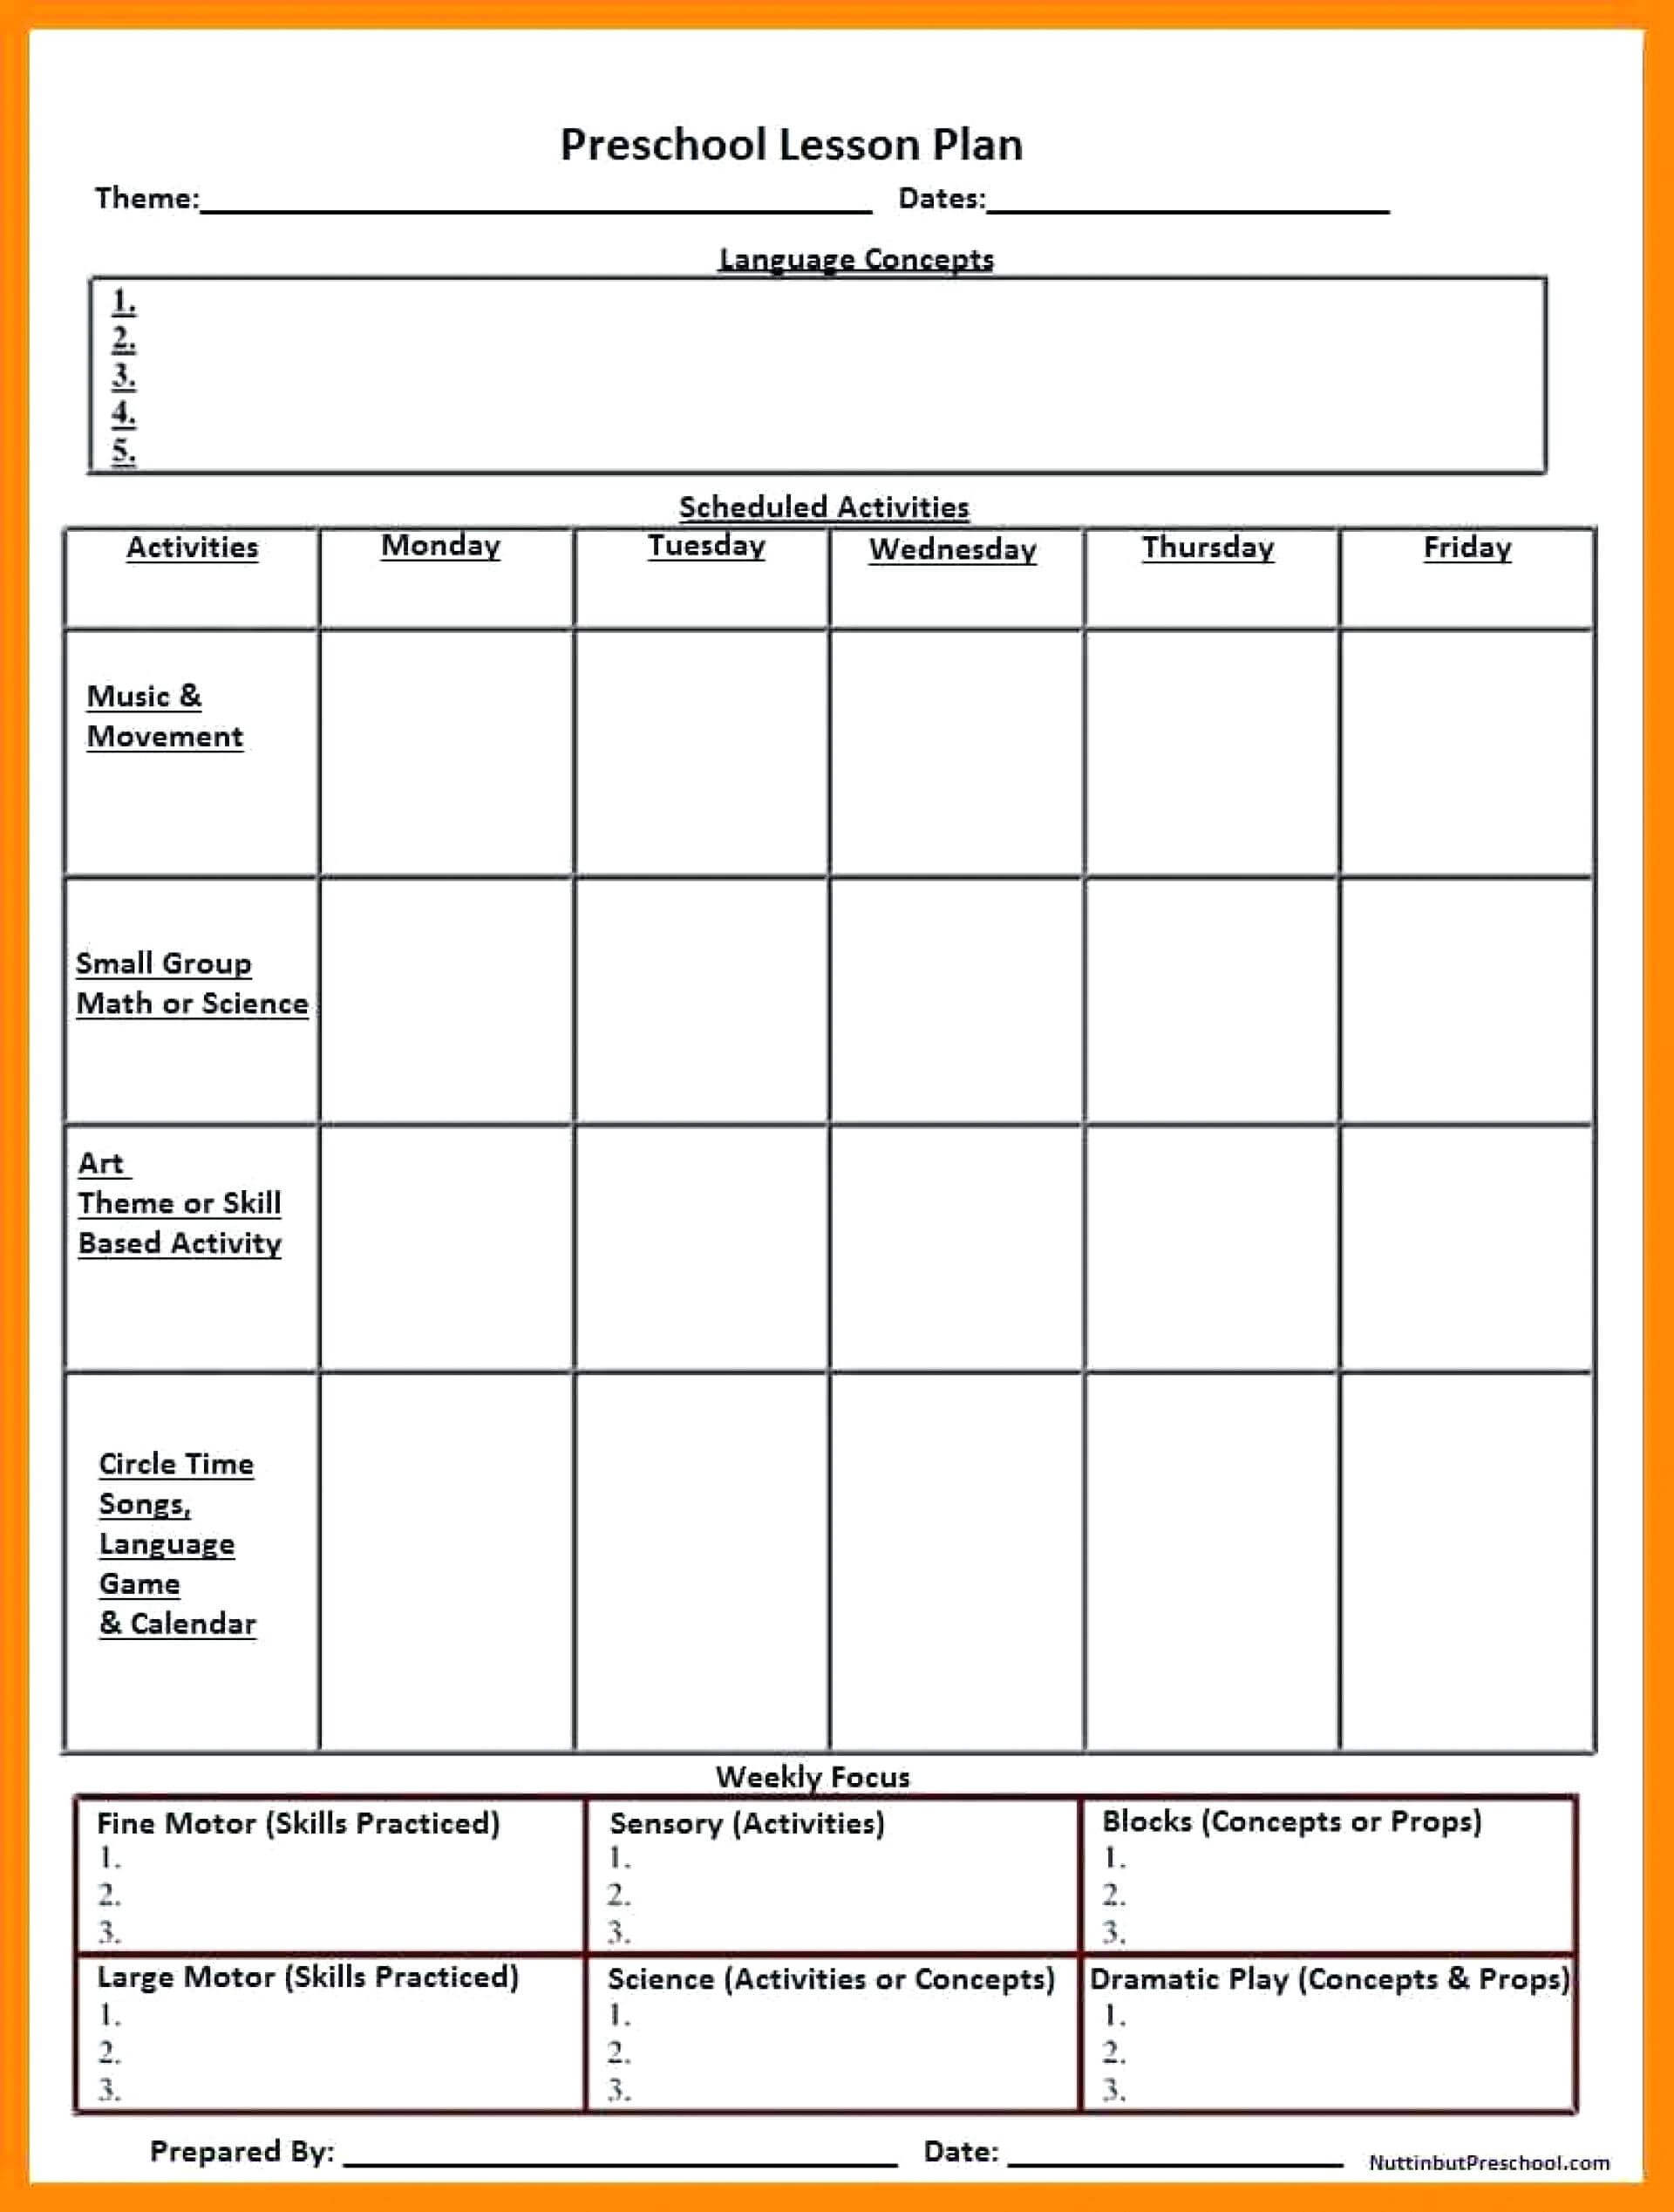 020 Lesson Plans Template For Preschool Free Printable Inside Blank Preschool Lesson Plan Template